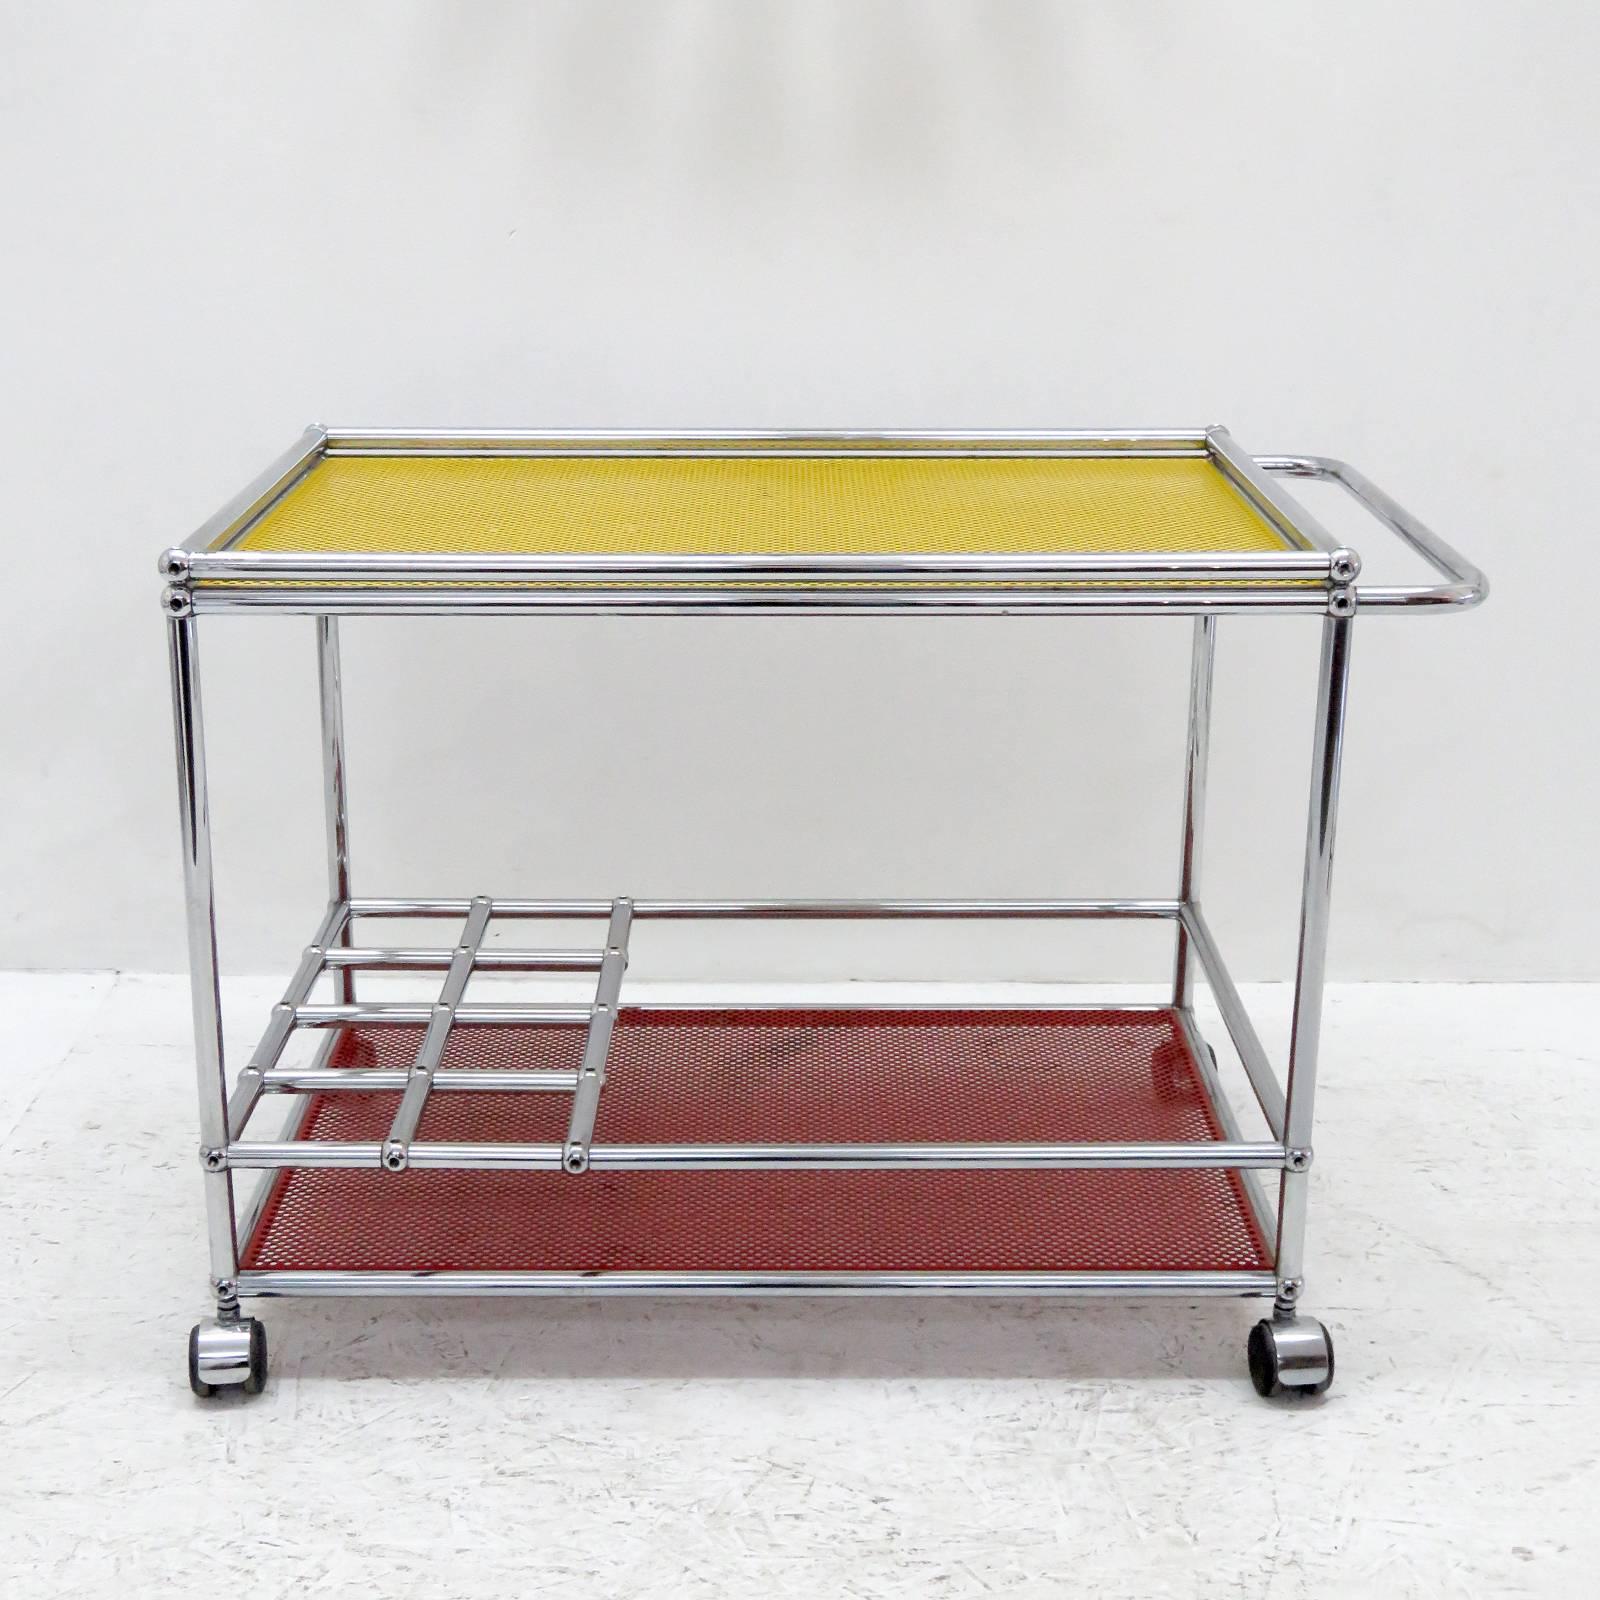 Stunning bar cart by Fritz Haller & Paul Scharer for USM Haller, two-tier modular chrome frame on casters with unique red and yellow powder-coated perforated metal shelves, frame includes eight bottle compartments, can be extended with additional